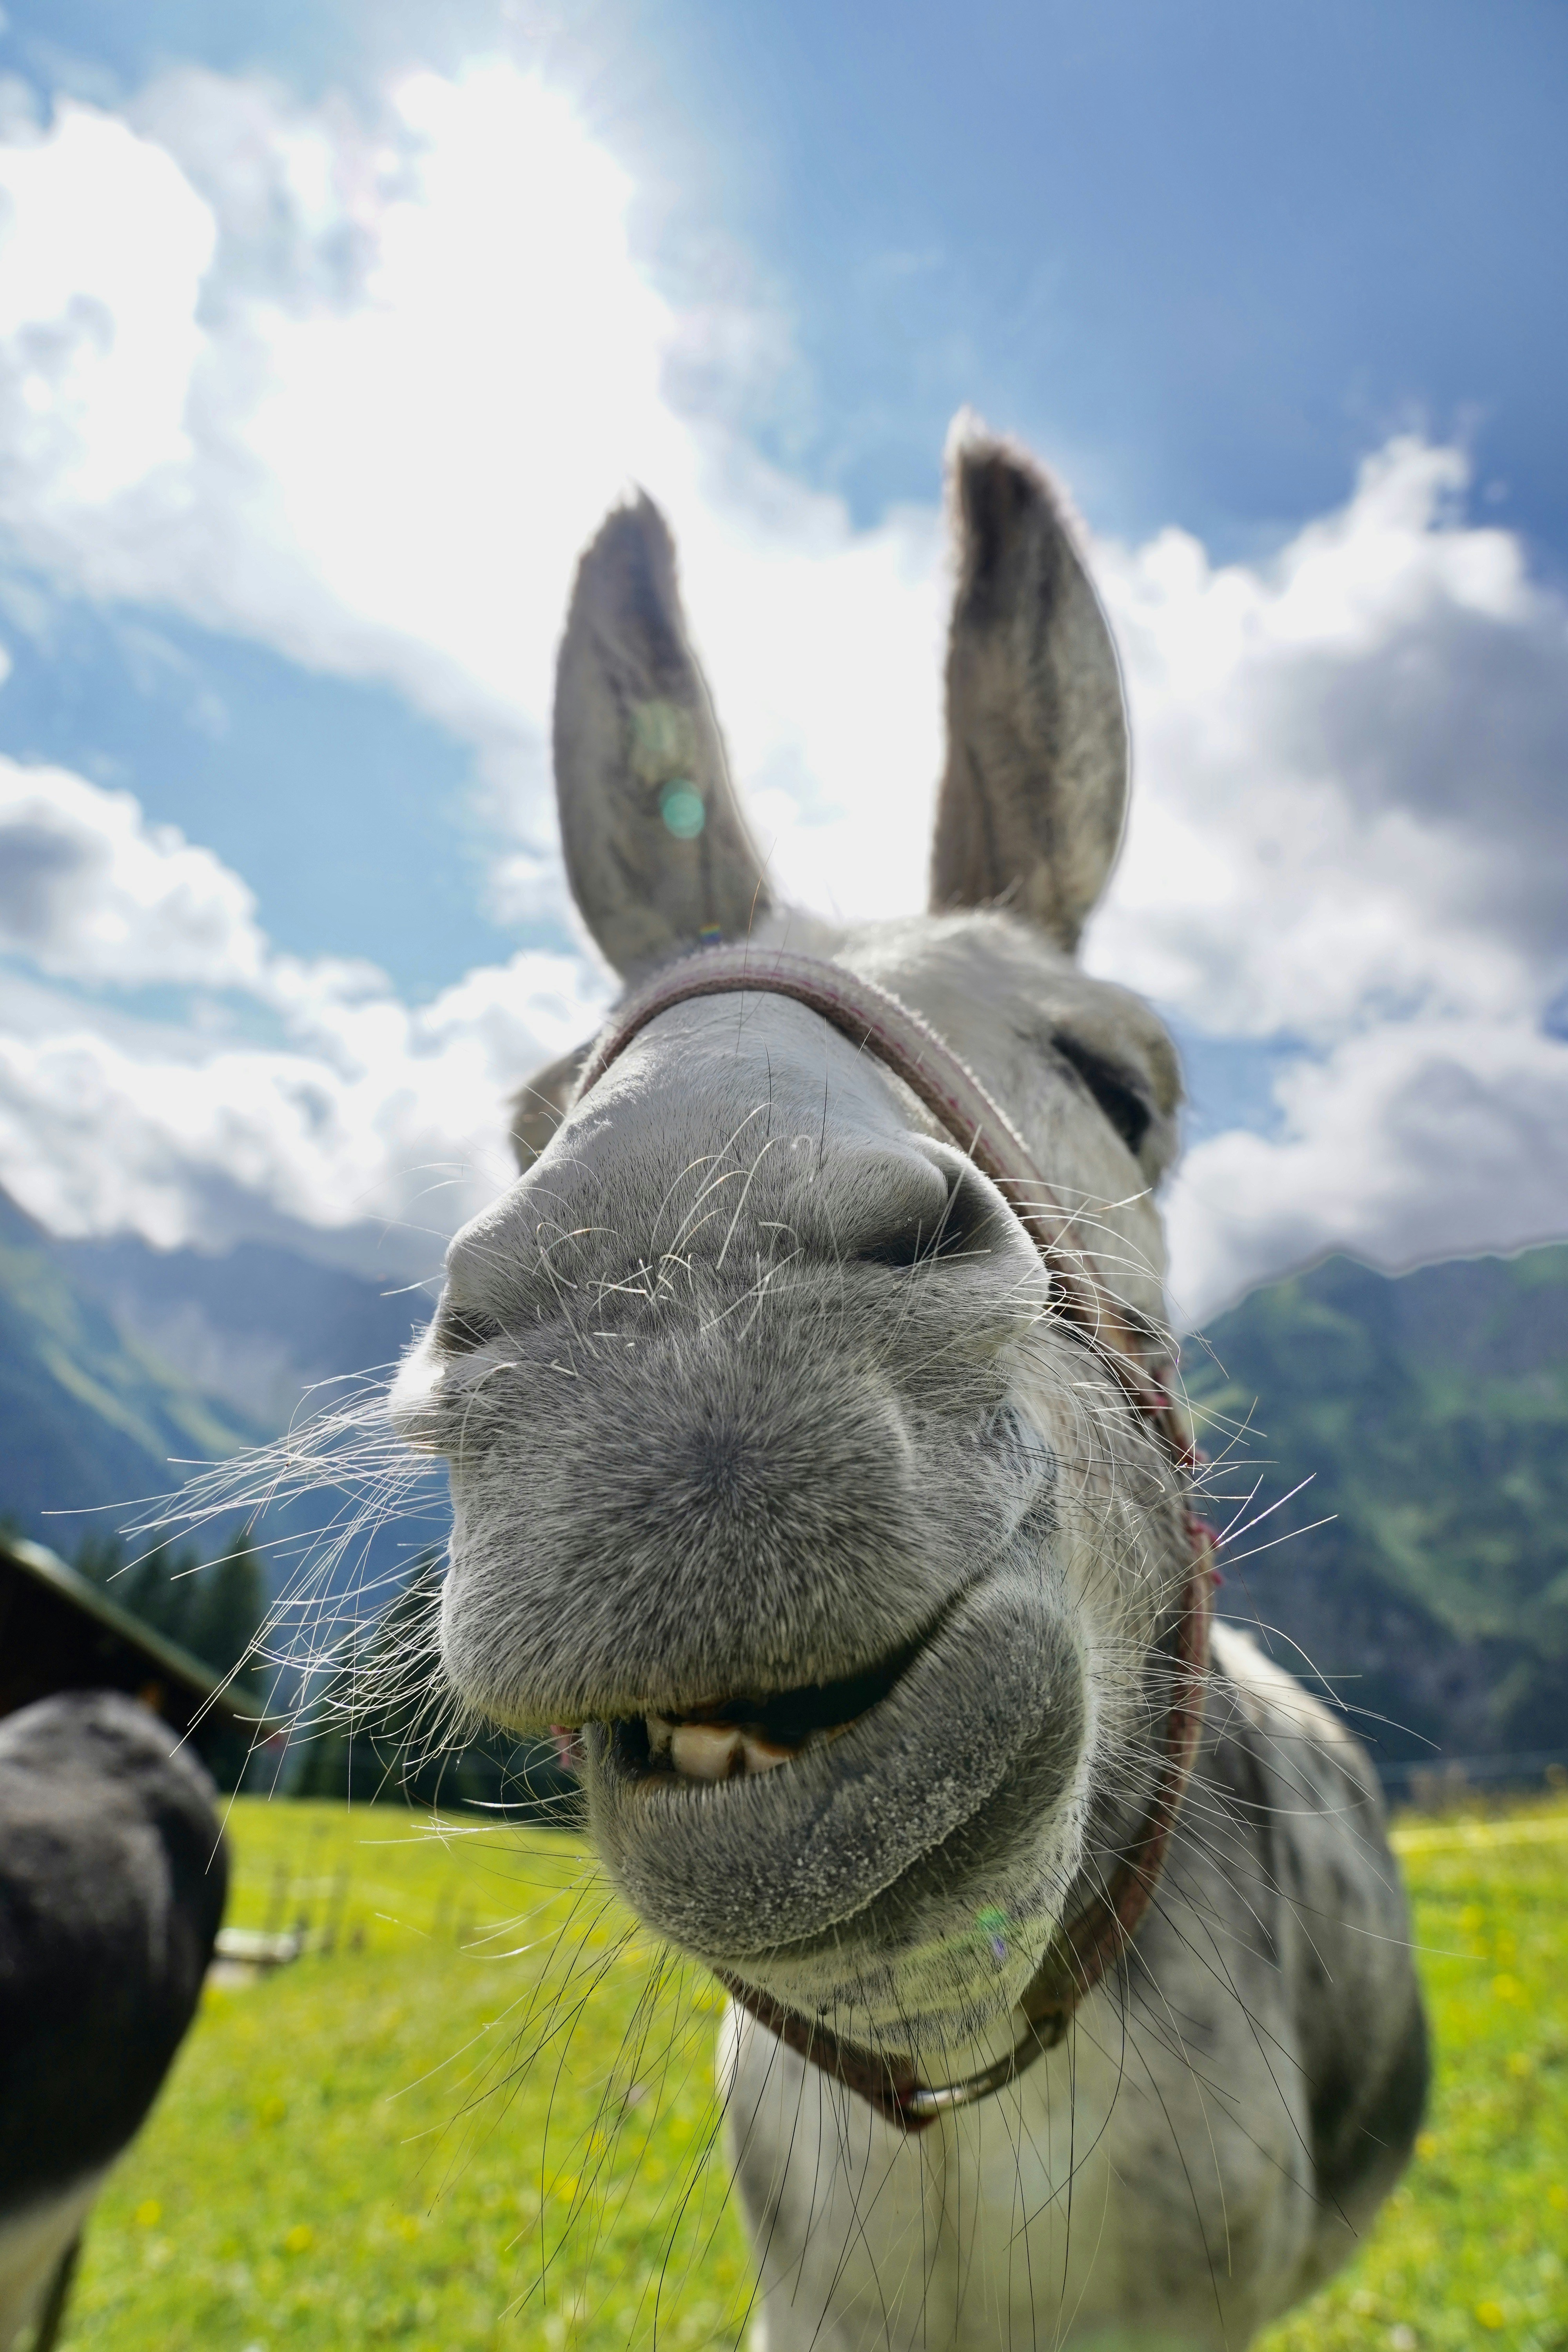 100+ Donkey Images Download Free Pictures On Unsplash pic